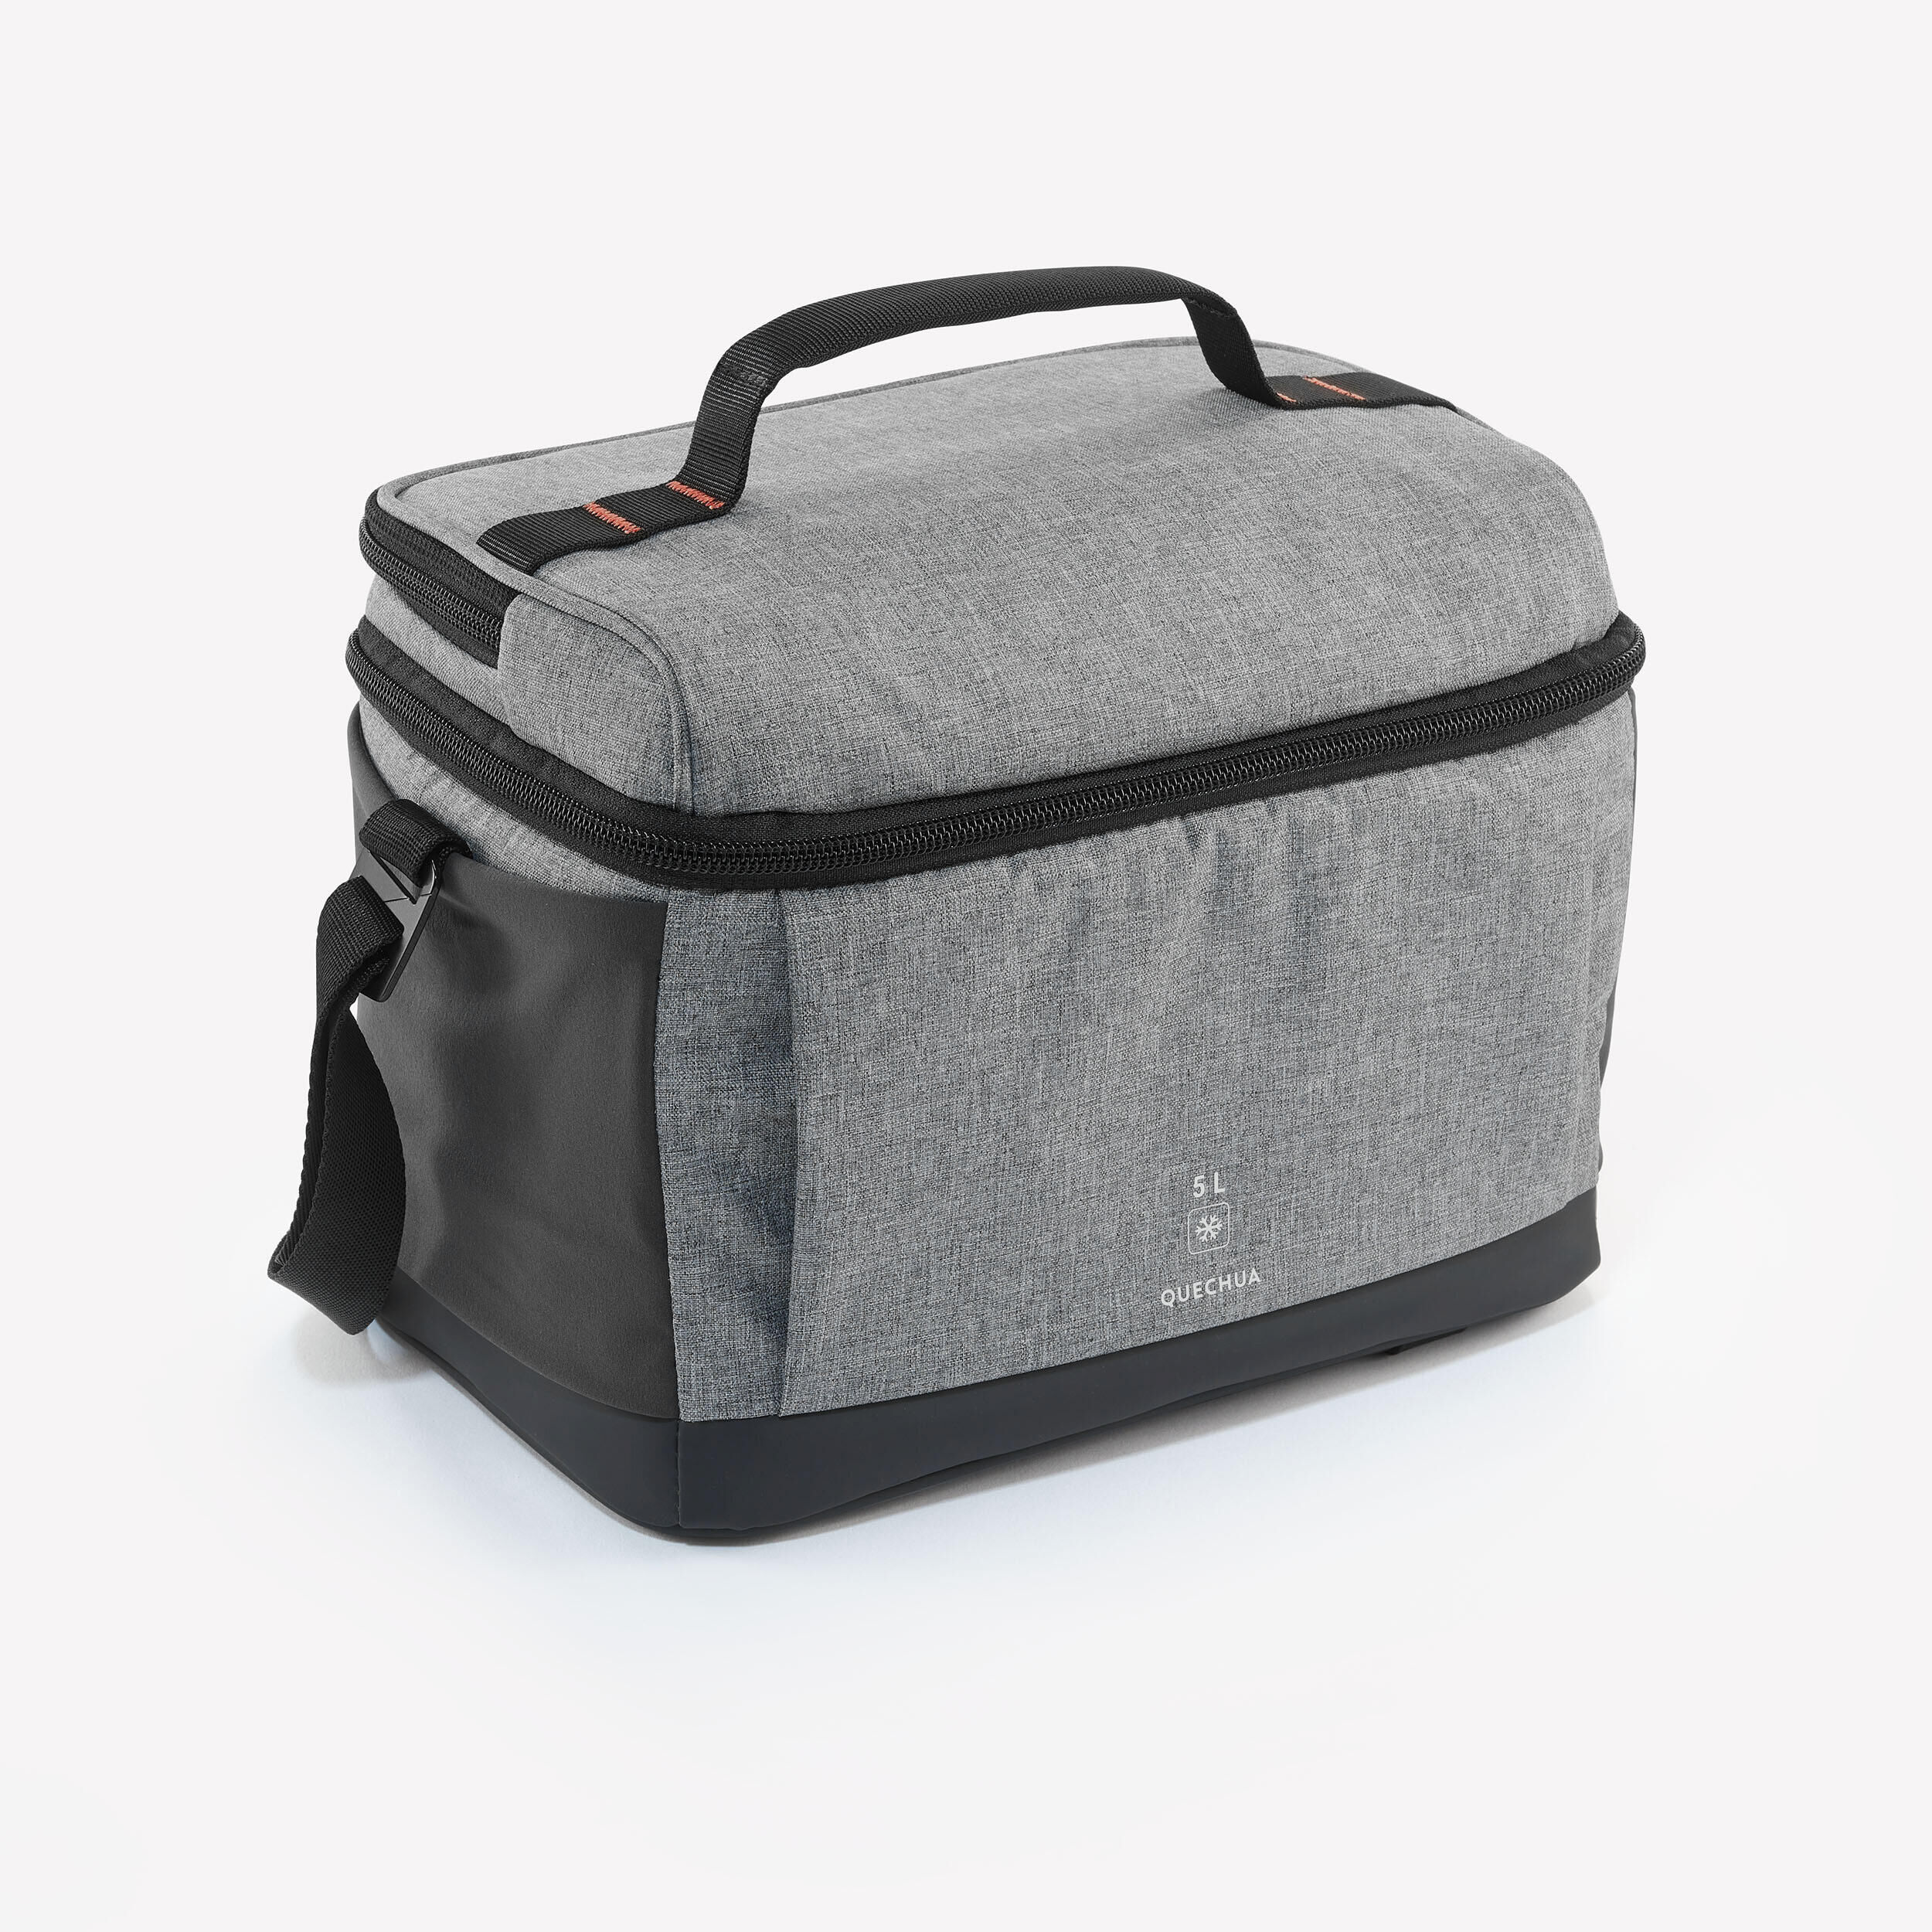 QUECHUA Isothermal Lunch Box 500 5 Litres 1 Set of Table Mats Included